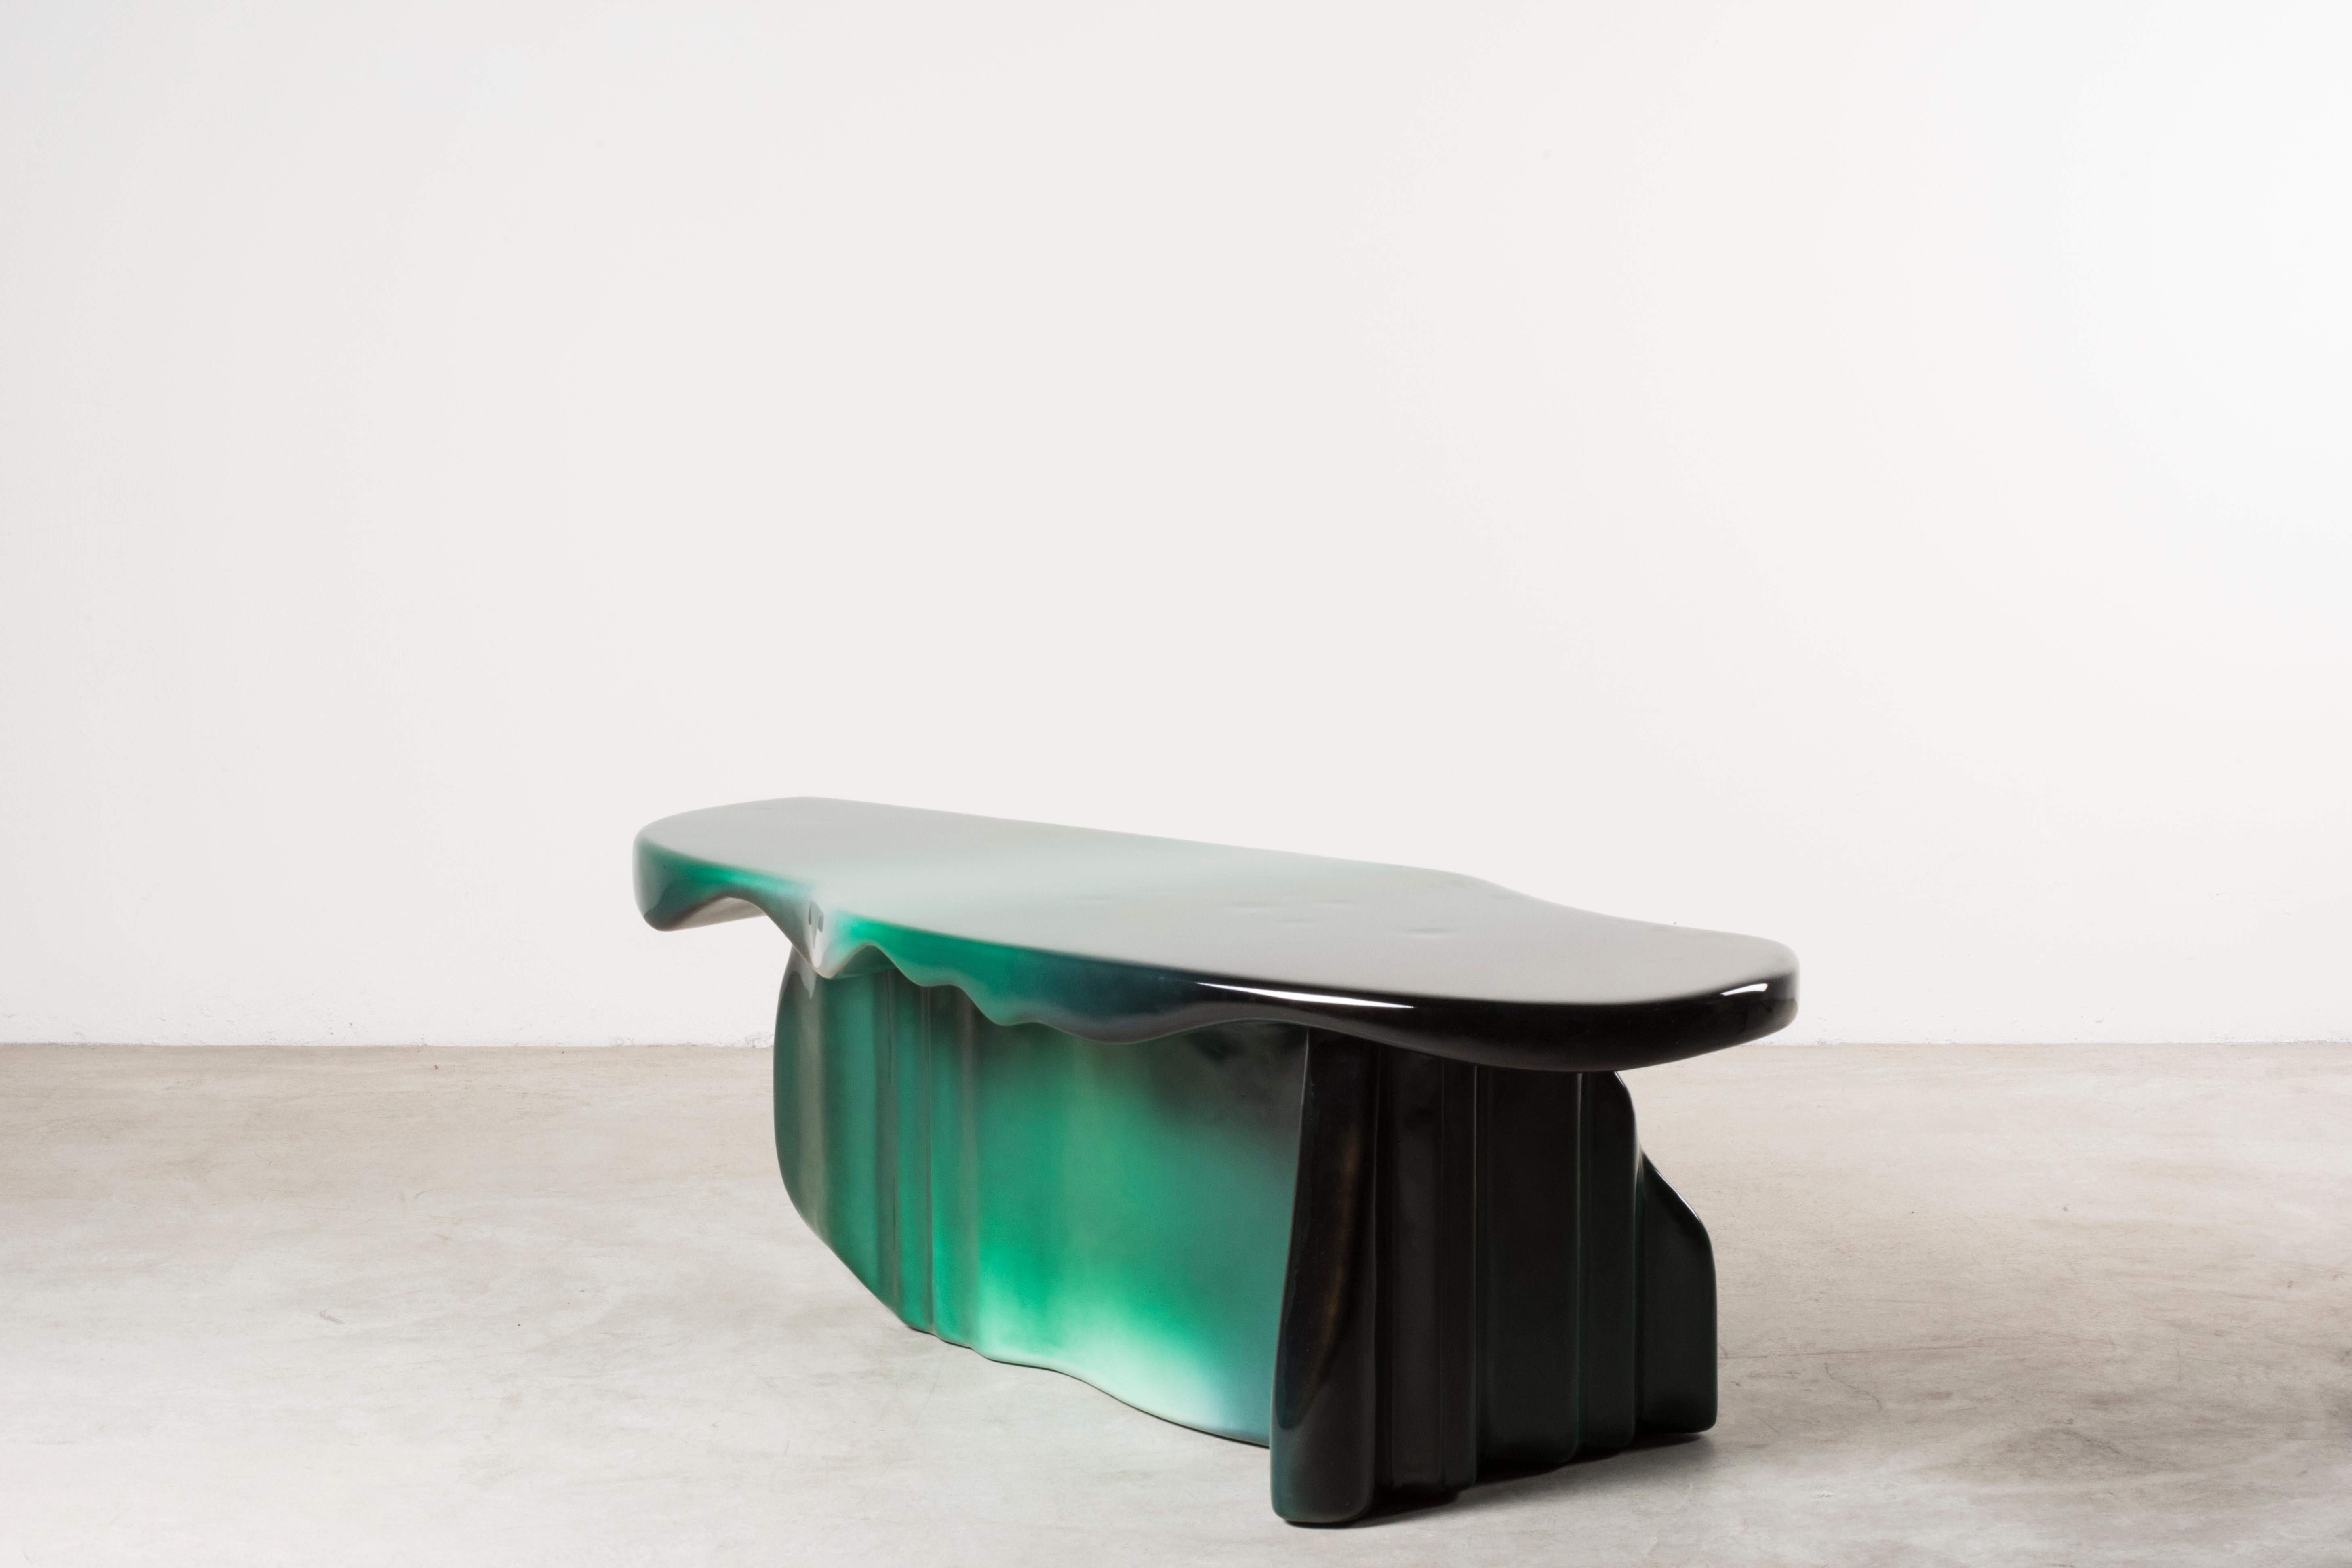 Guise 2 spray coffee table by Odd Matter, Italy, 2018. Nilufar edition. EPS foam, spray. Measures: 126 x 45 x H 52 cm 49.6 x 17.7 x H 20.5 in. Guise explores the first encounter? through the potential of spray painting.? Surfaces protect what is